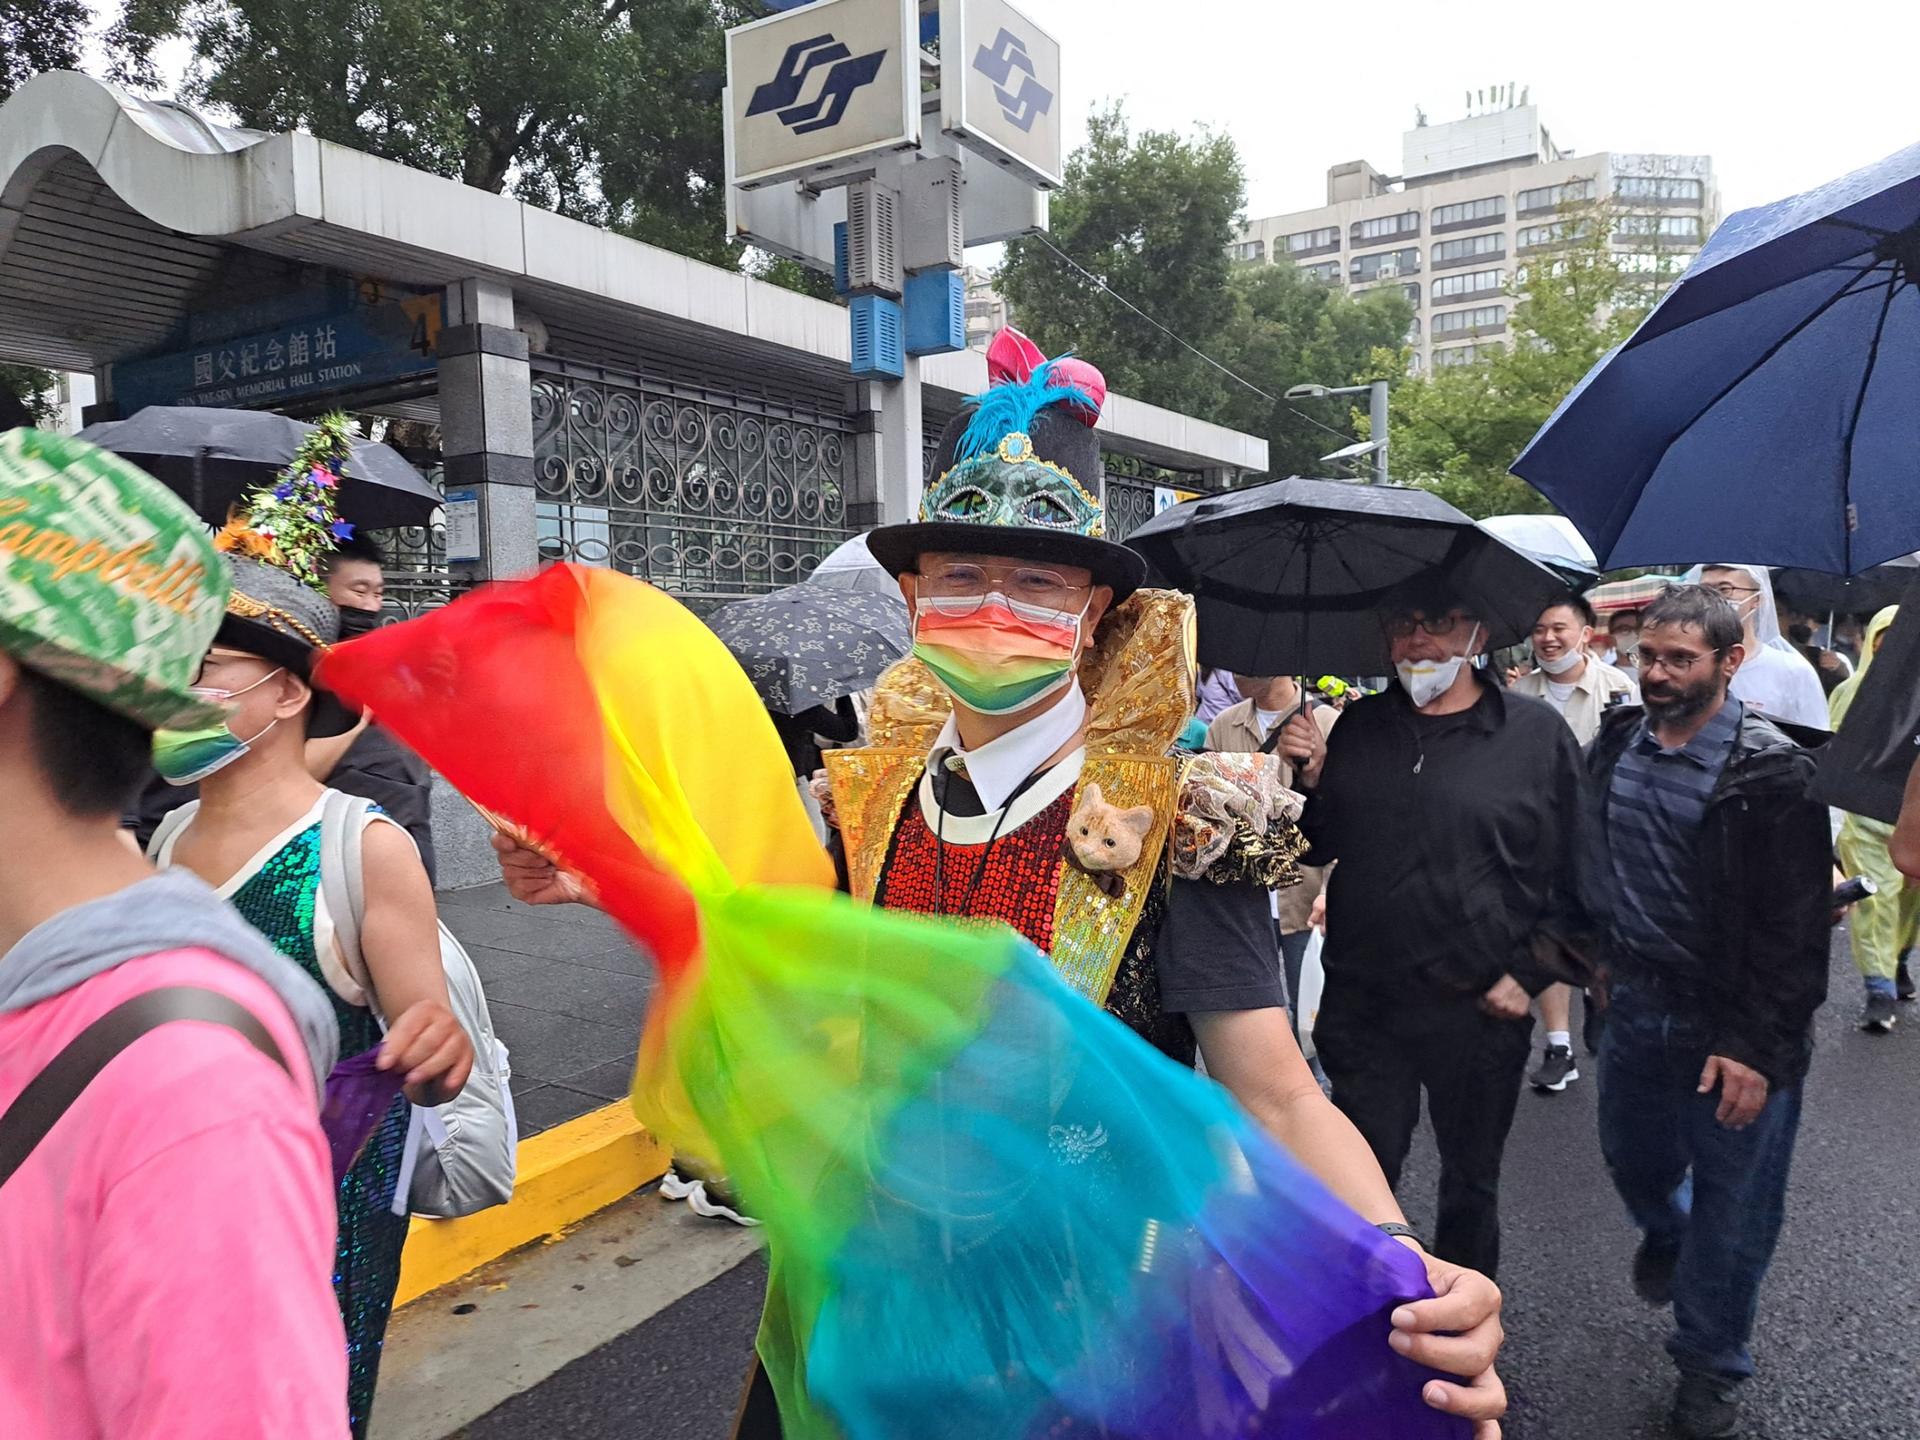 Over a 100,000 people arrived at Taipei's City Hall Plaza despite heavy rain for Taiwan's annual Pride celebration on Saturday, Oct. 29.